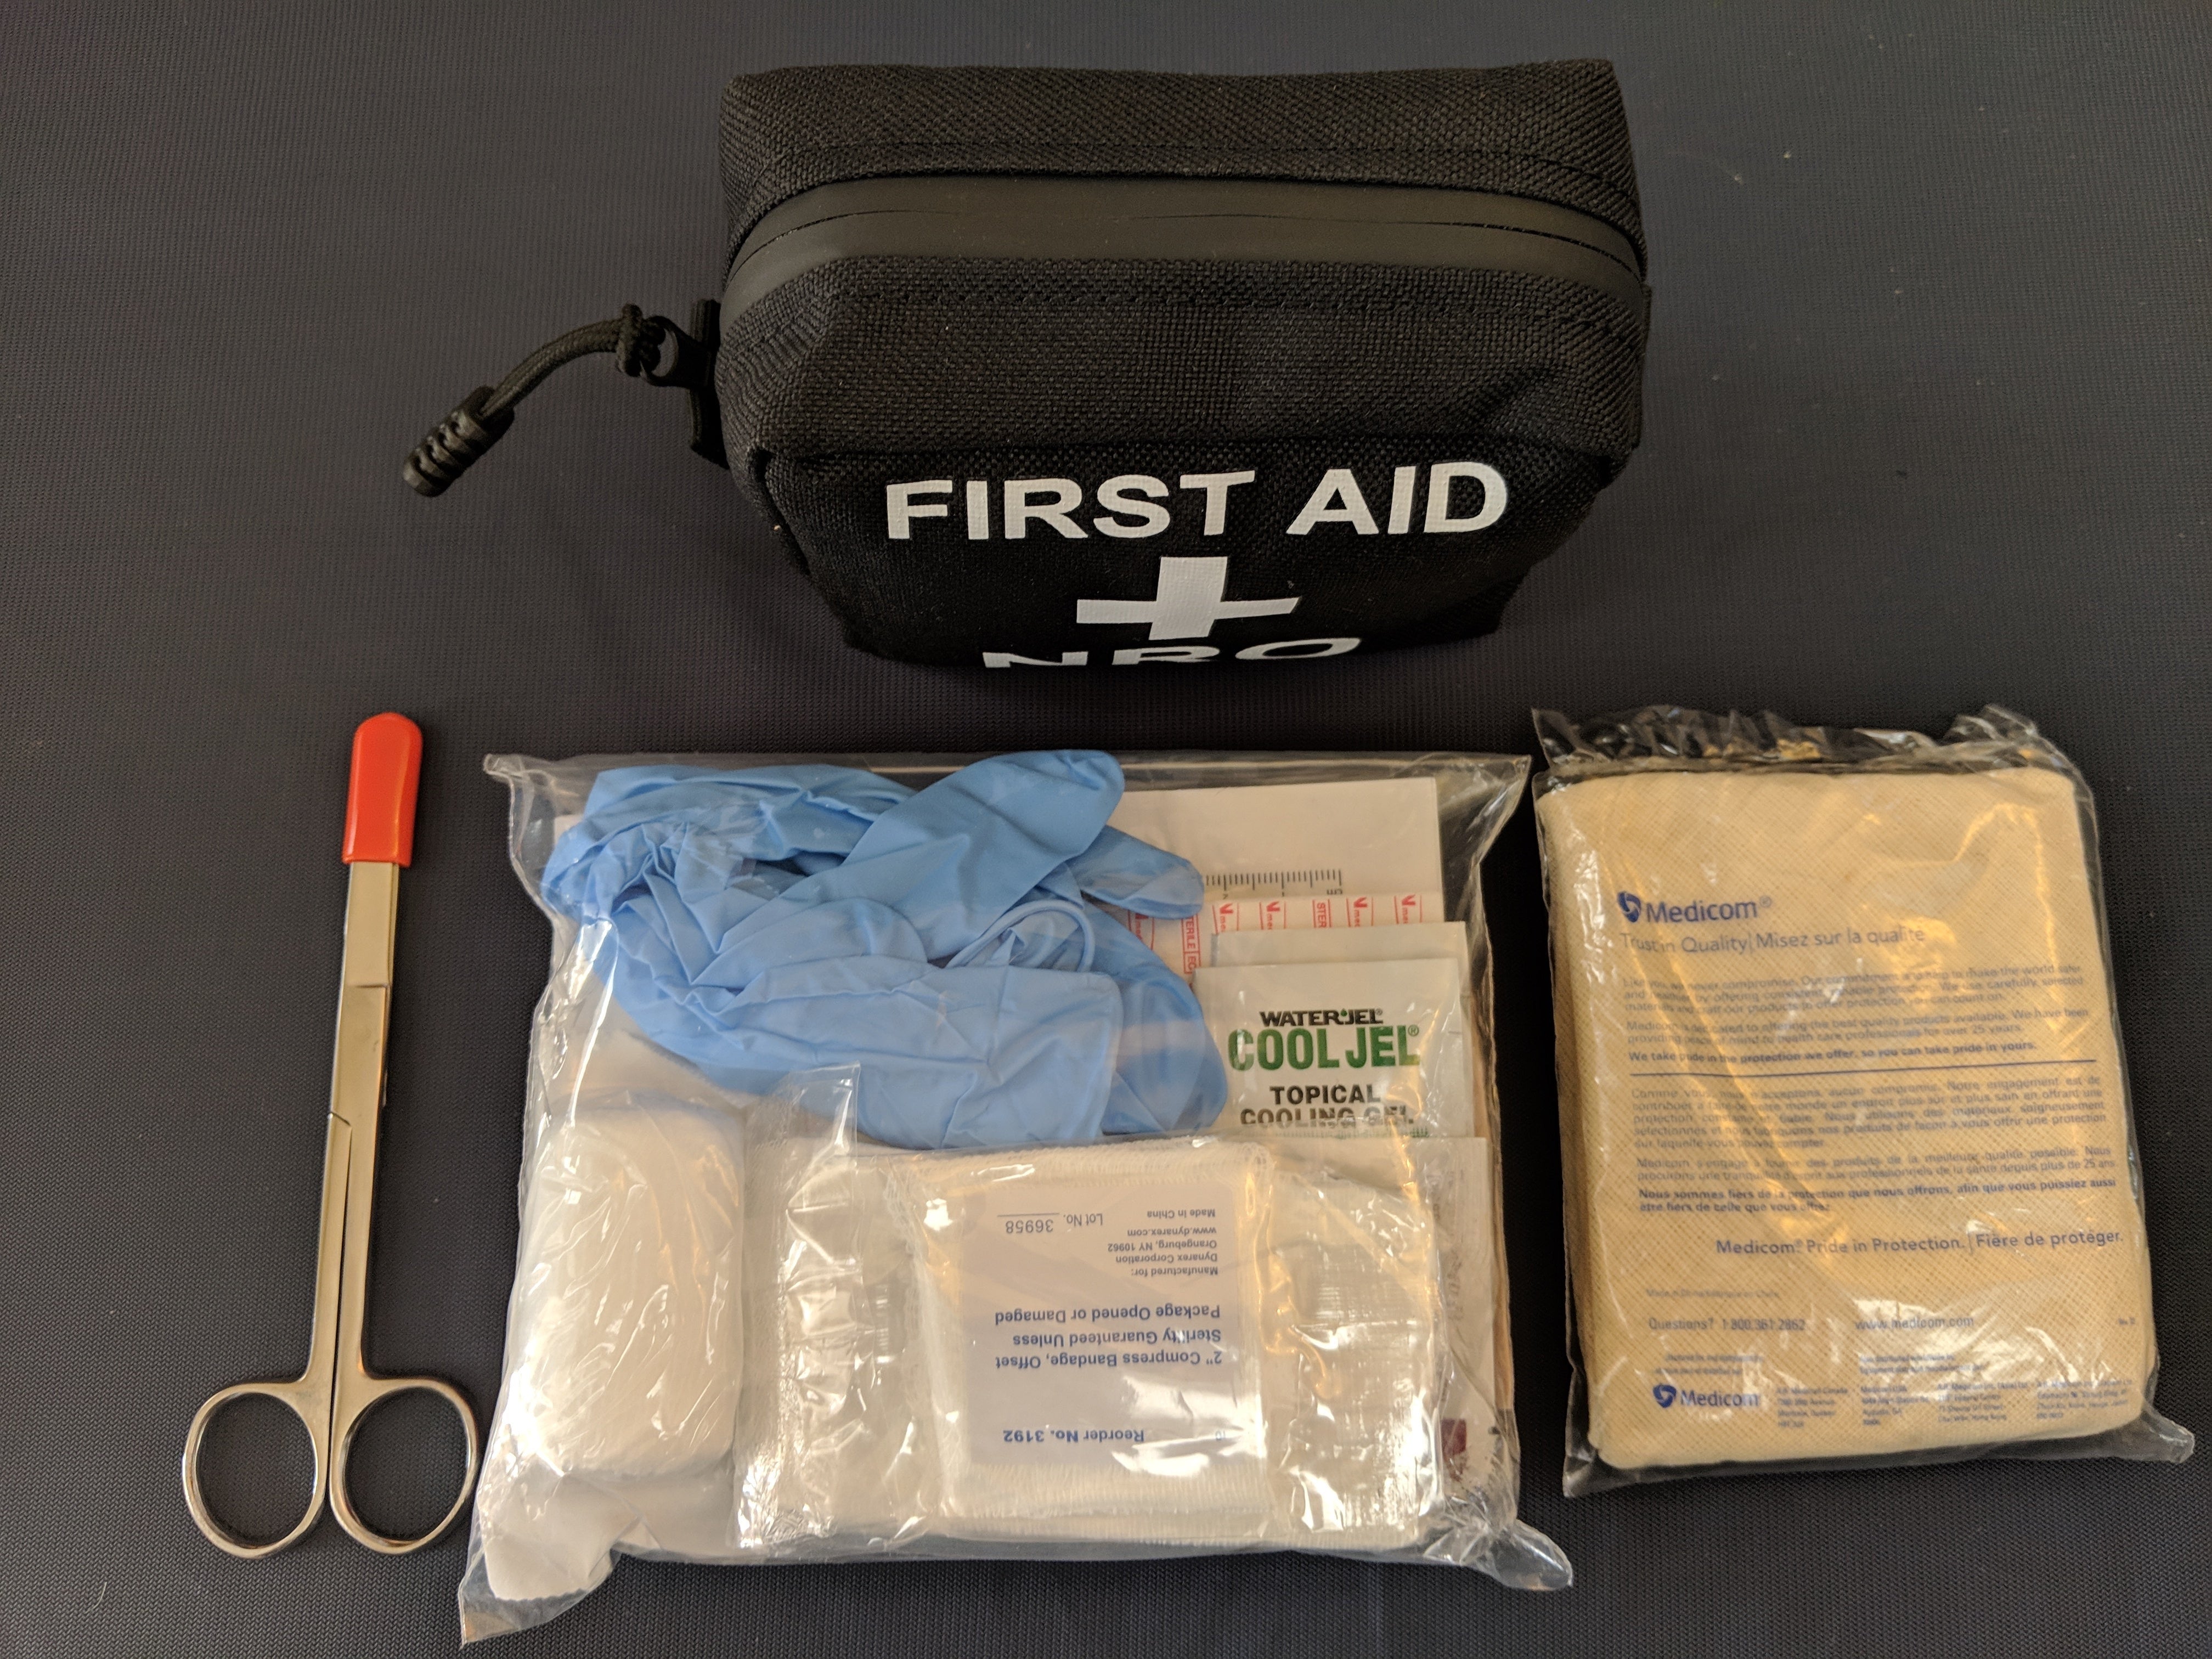 Professional First Aid kit for personal safety